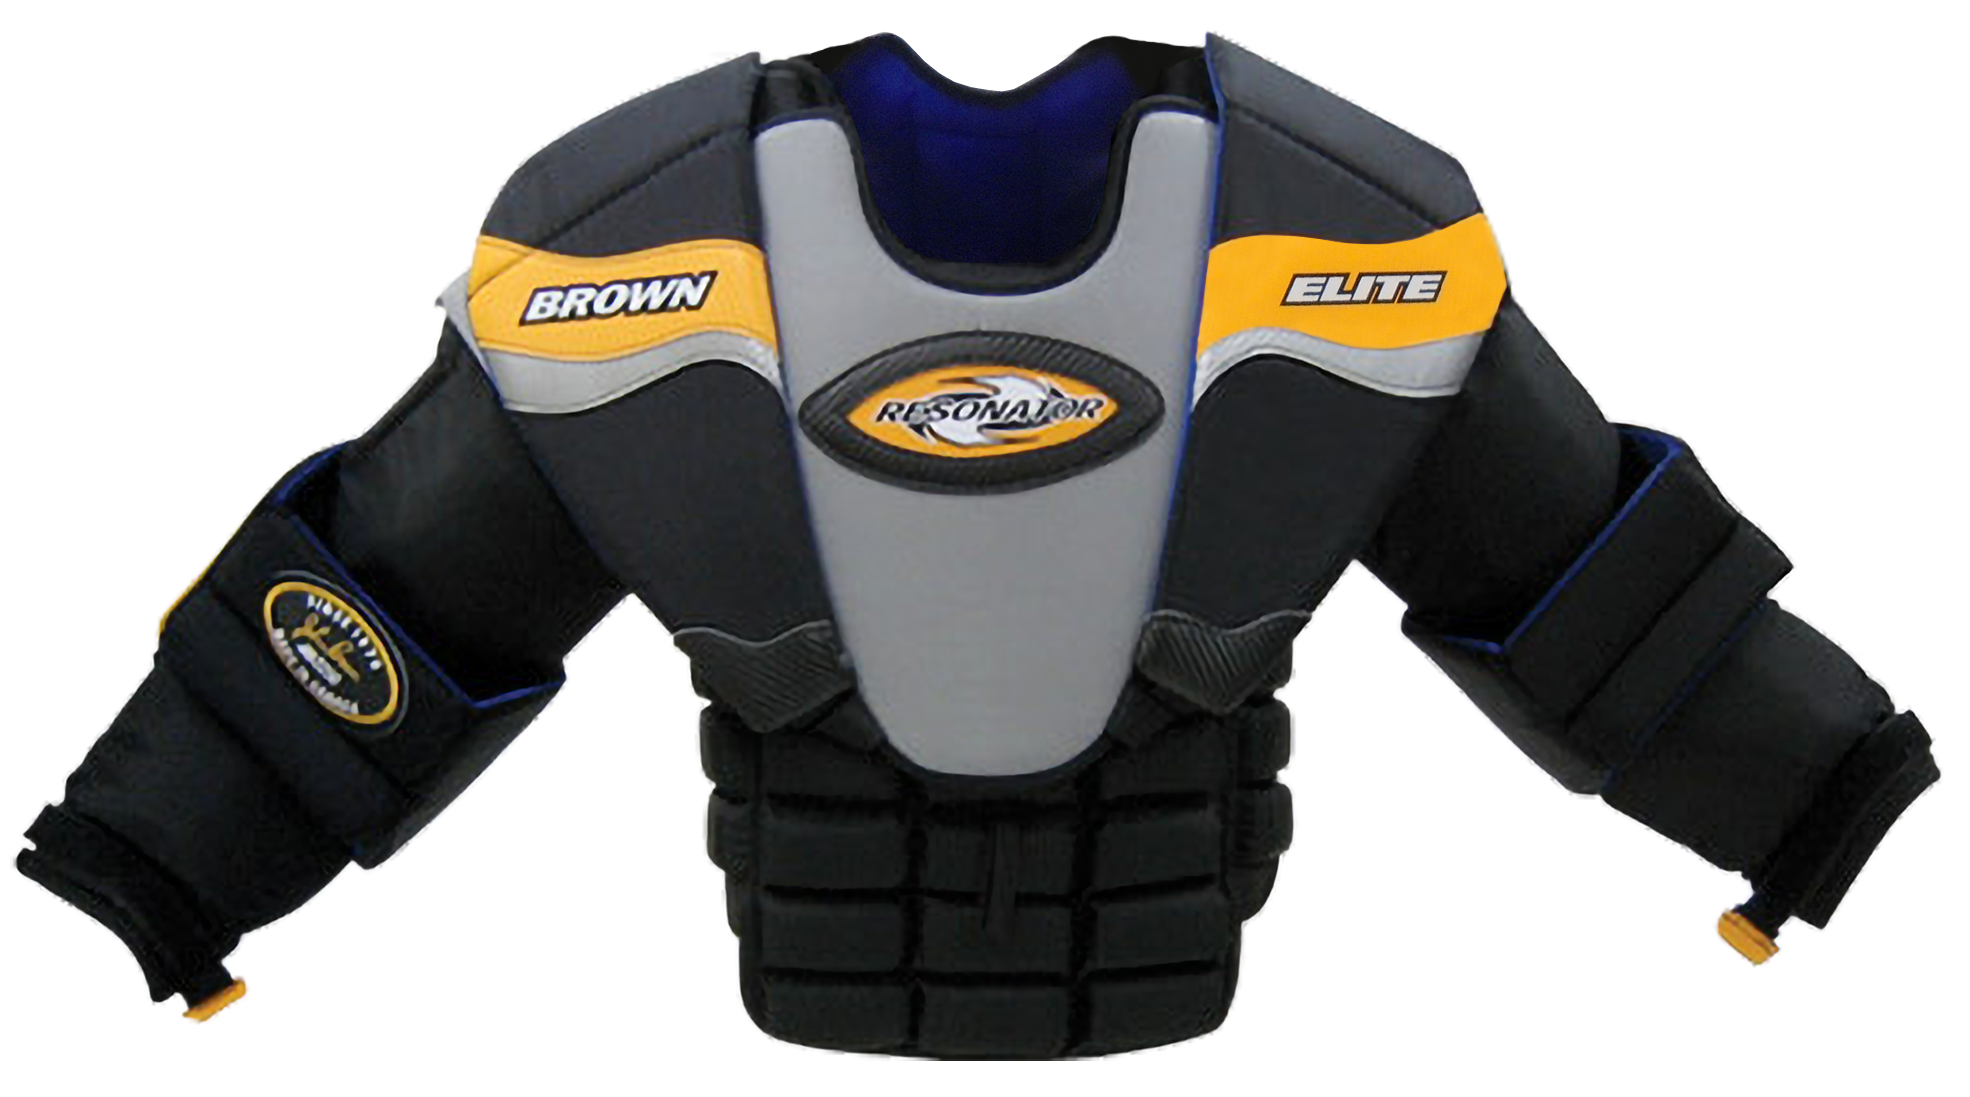 Front view of 2250 chest protector